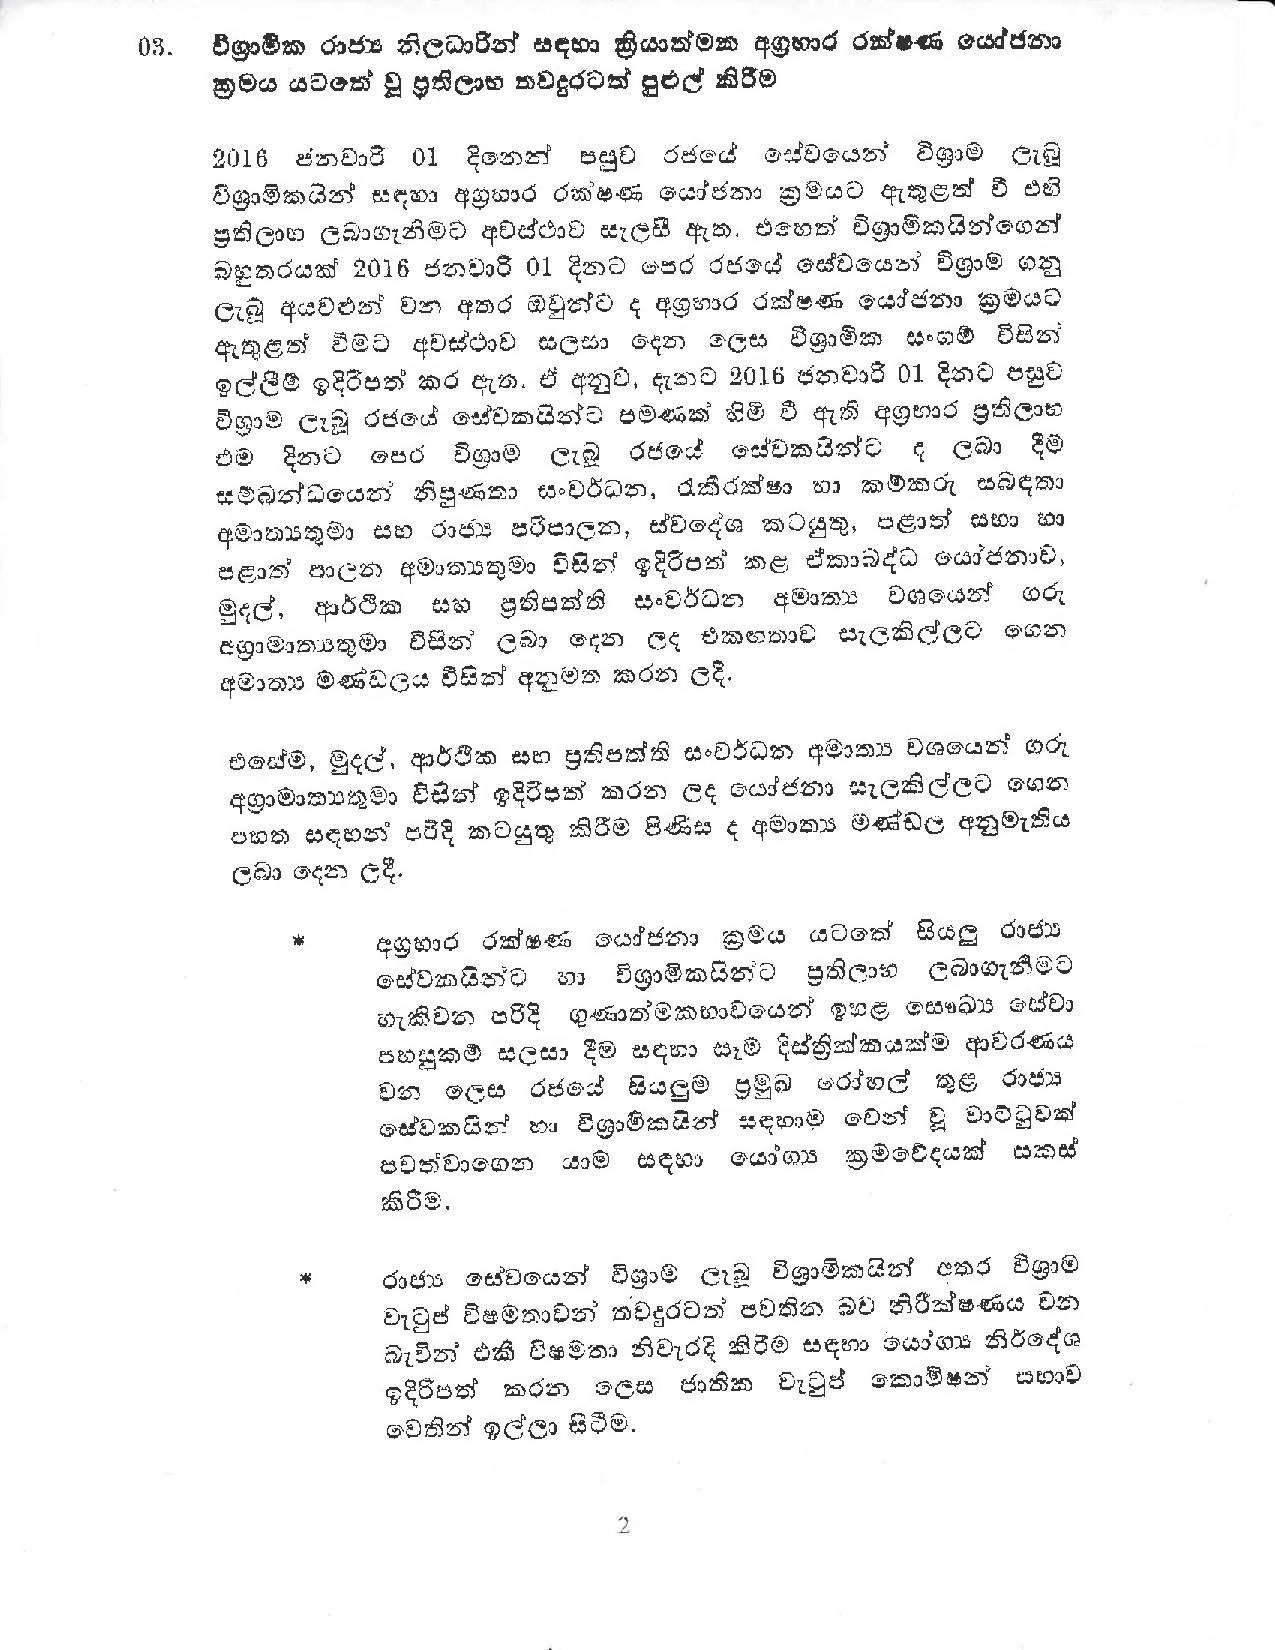 Cabinet Decision on 22.07.2020 page 002